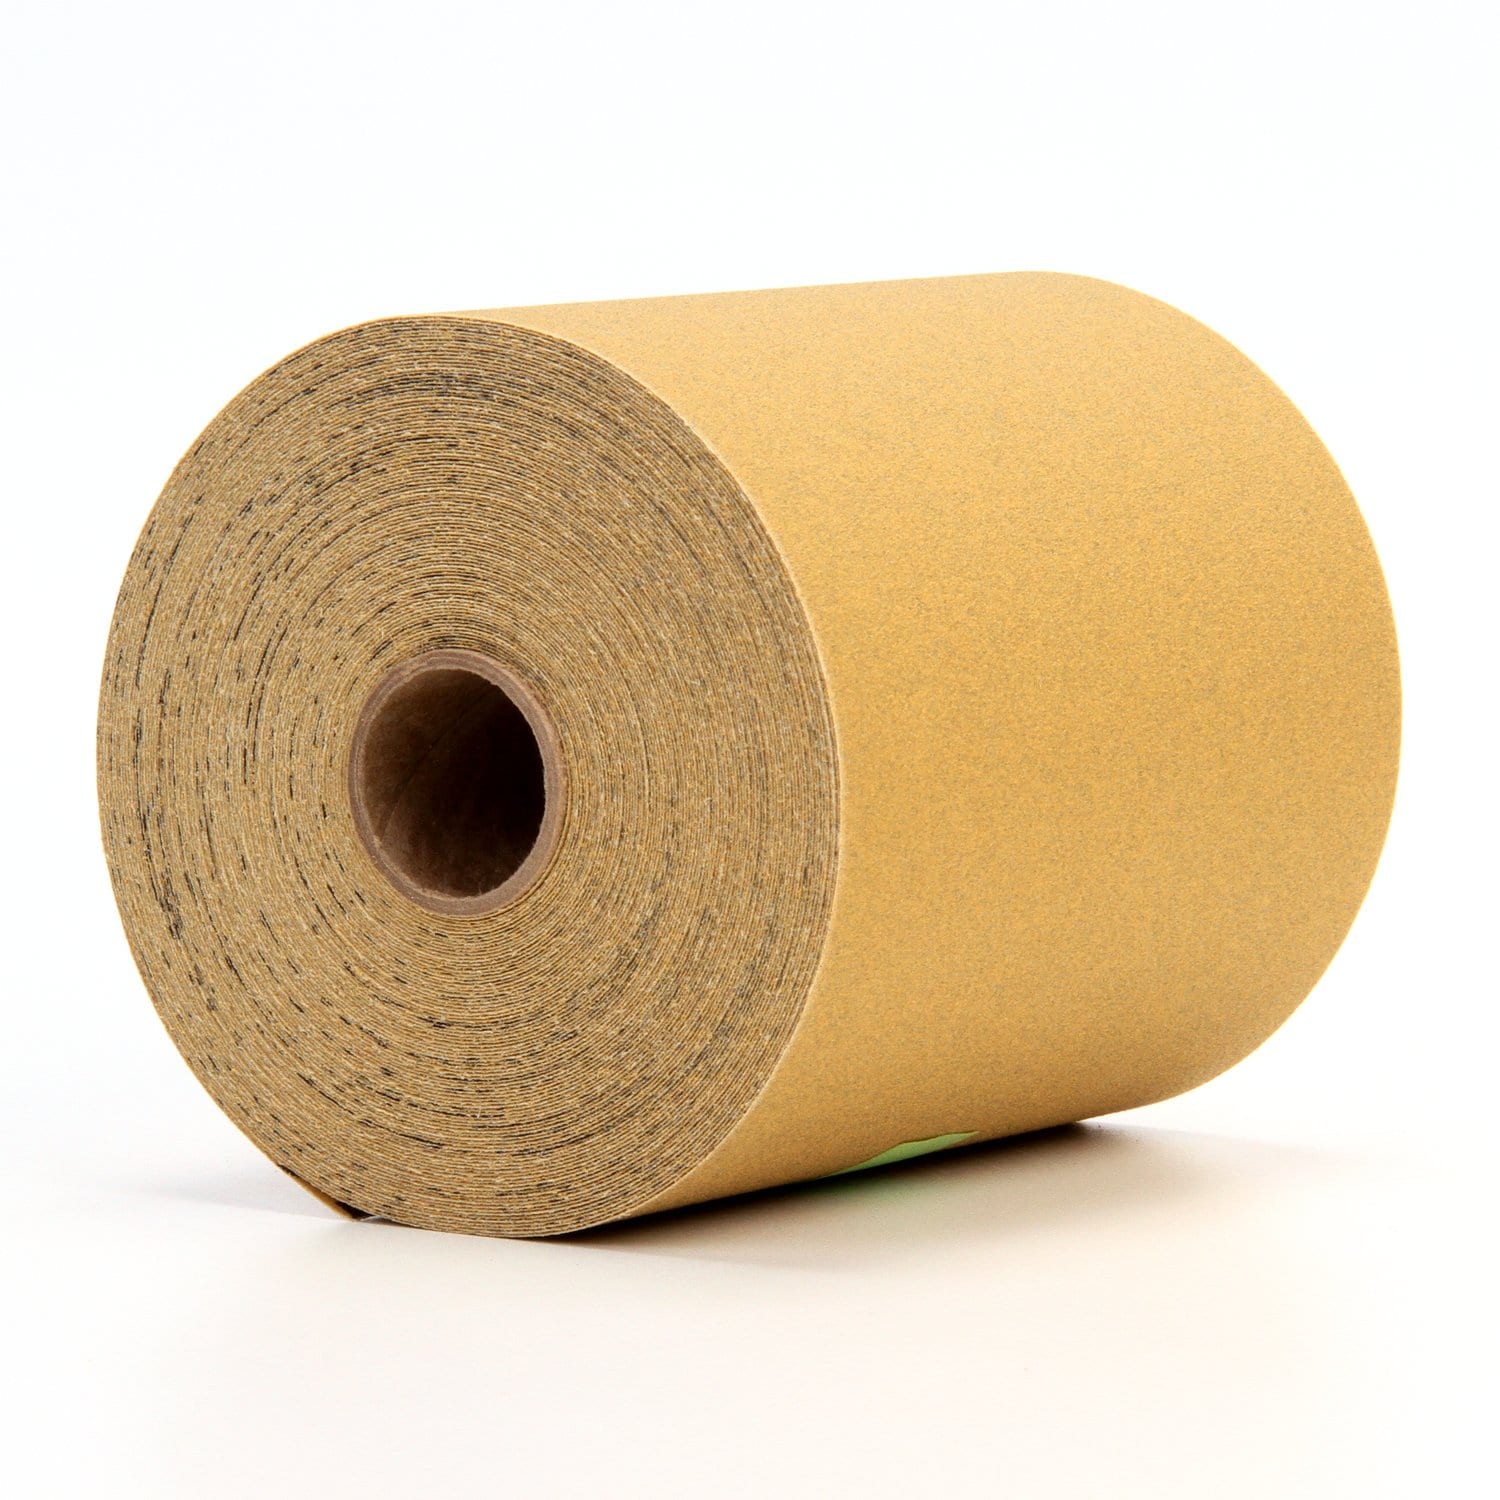 7100069995 - 3M Stikit Paper Roll 236U, P120 C-weight, Config